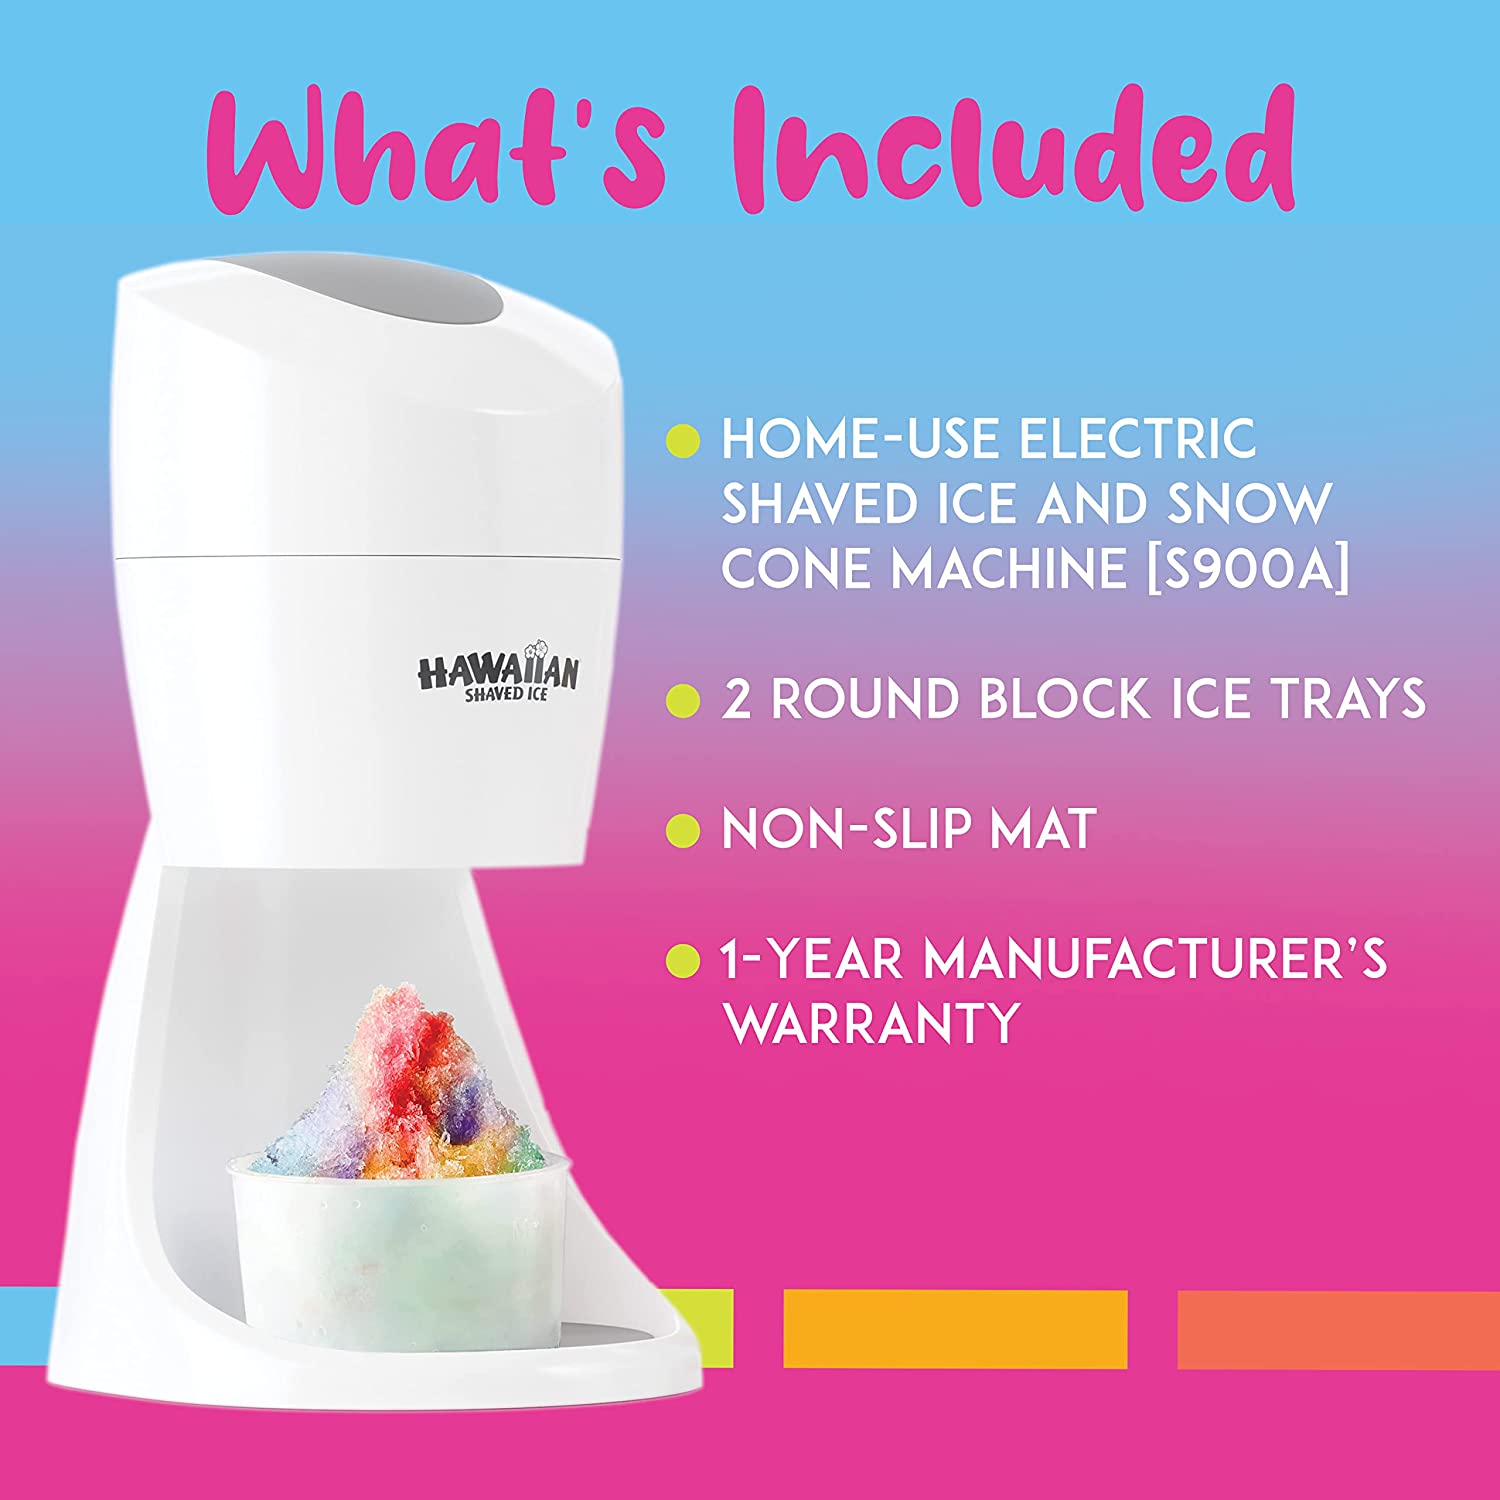 A snow cone and shaved ice machine. There is text which says, 'What's Included: Home use electric shaved ice and snow cone machine, 2 Round block ice trays, Non-slip mat, 1 year manufactures warranty.'